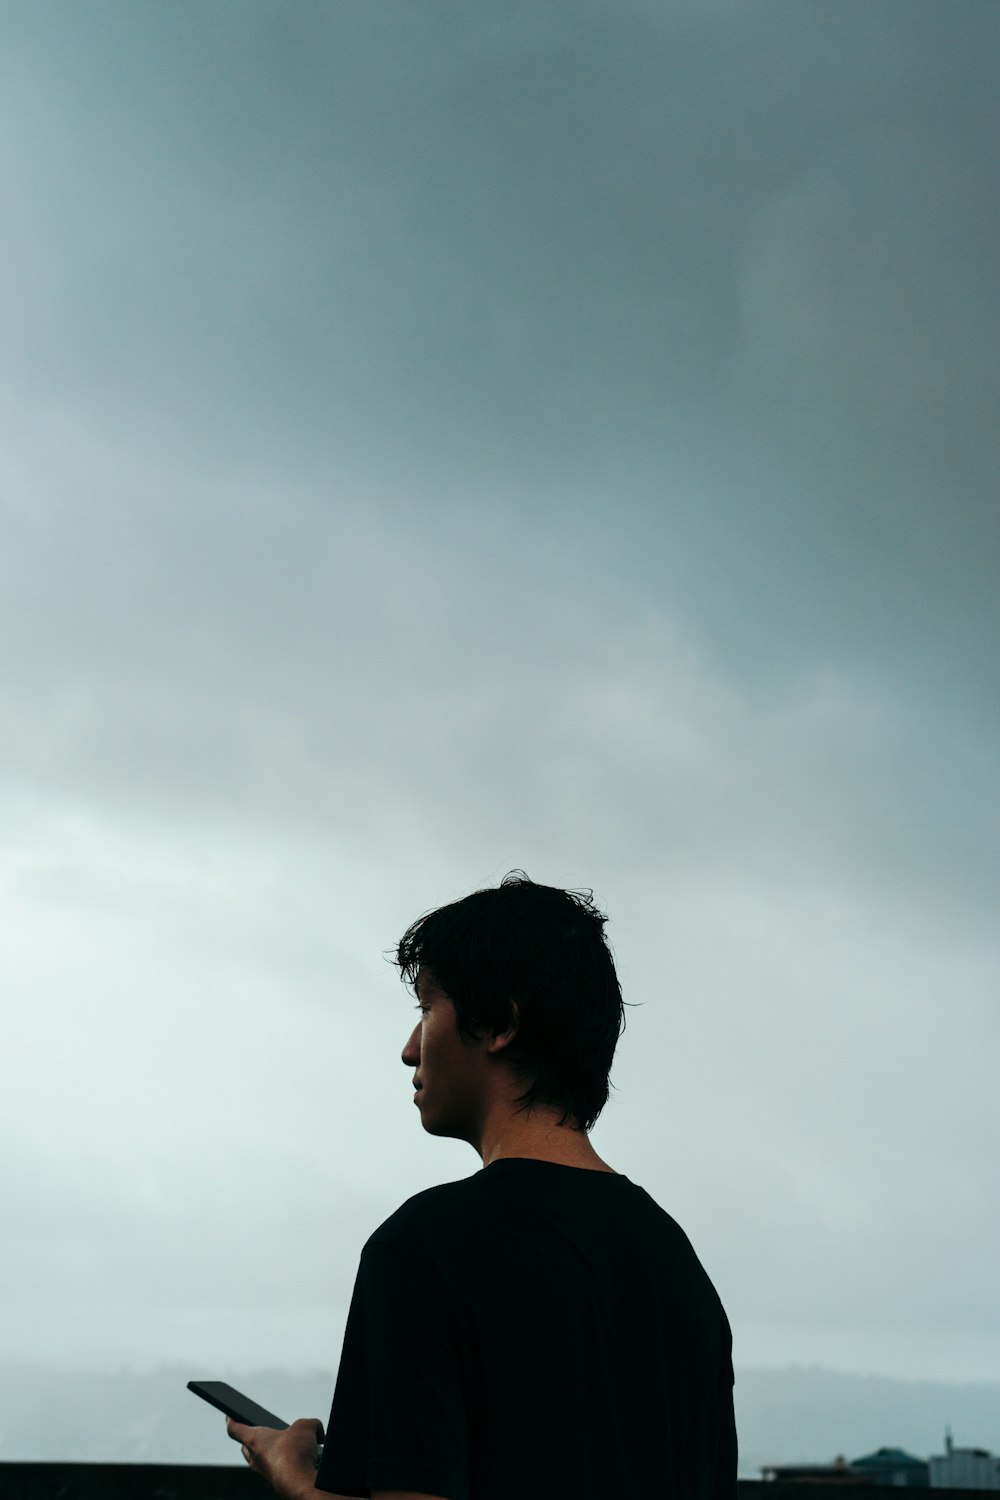 a man standing in front of a cloudy sky holding a cell phone